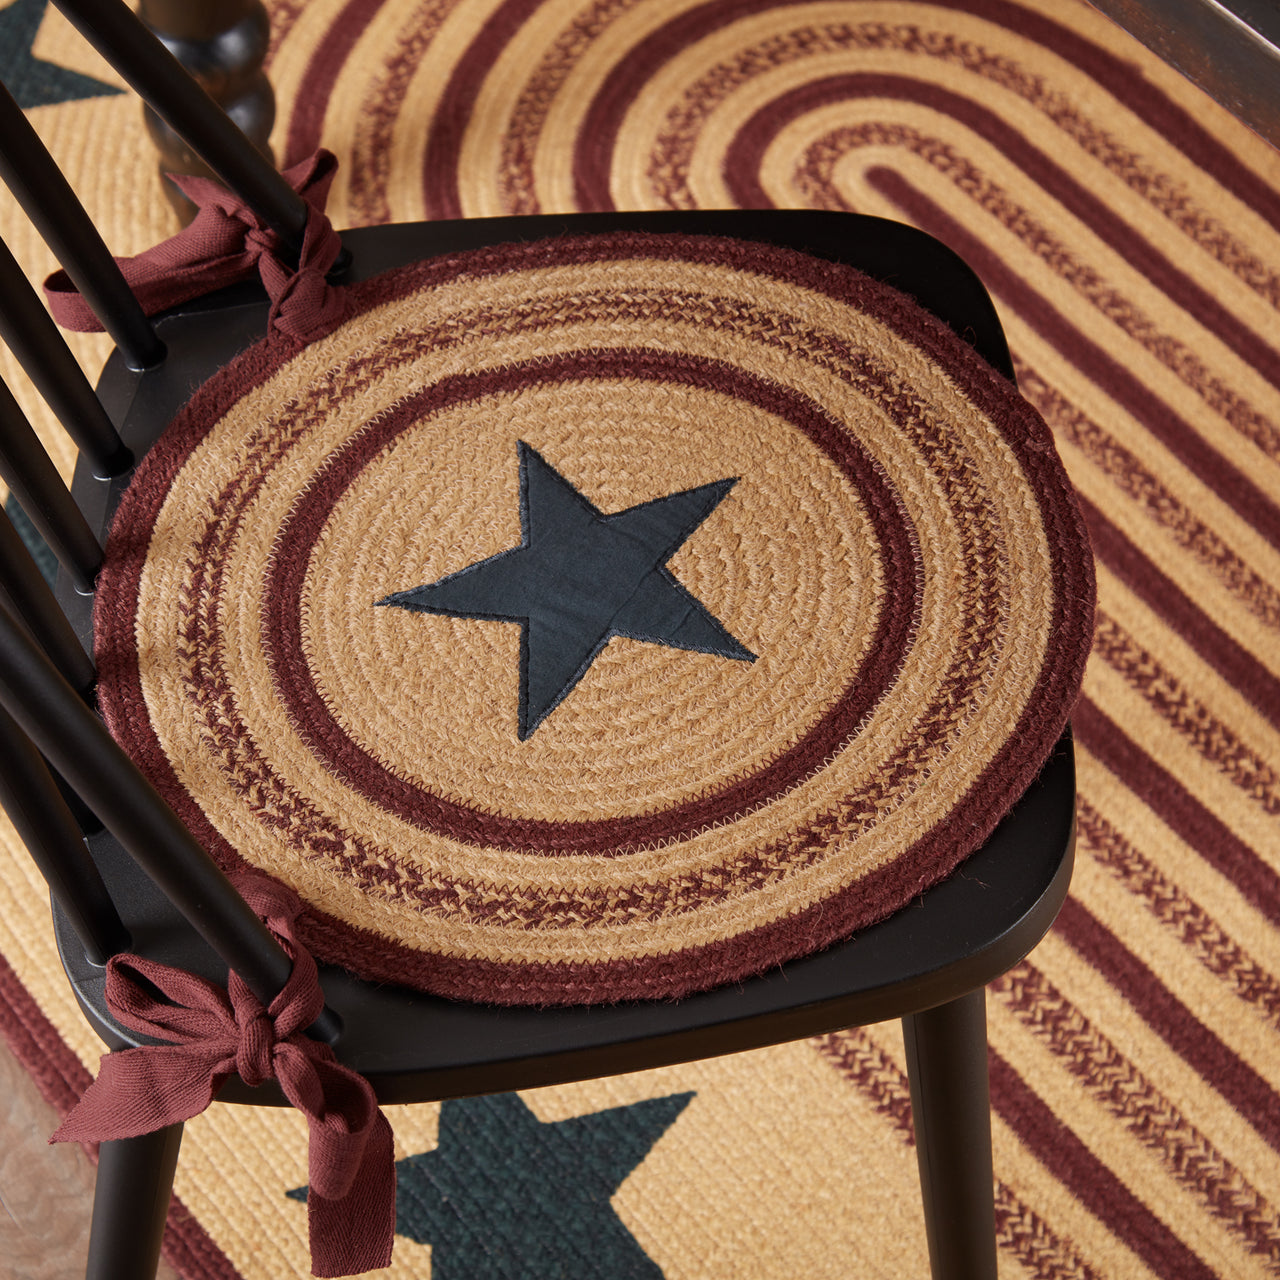 Potomac Jute Applique Star Braided Chair Pad Set of 6 Natural, Burgundy, Navy